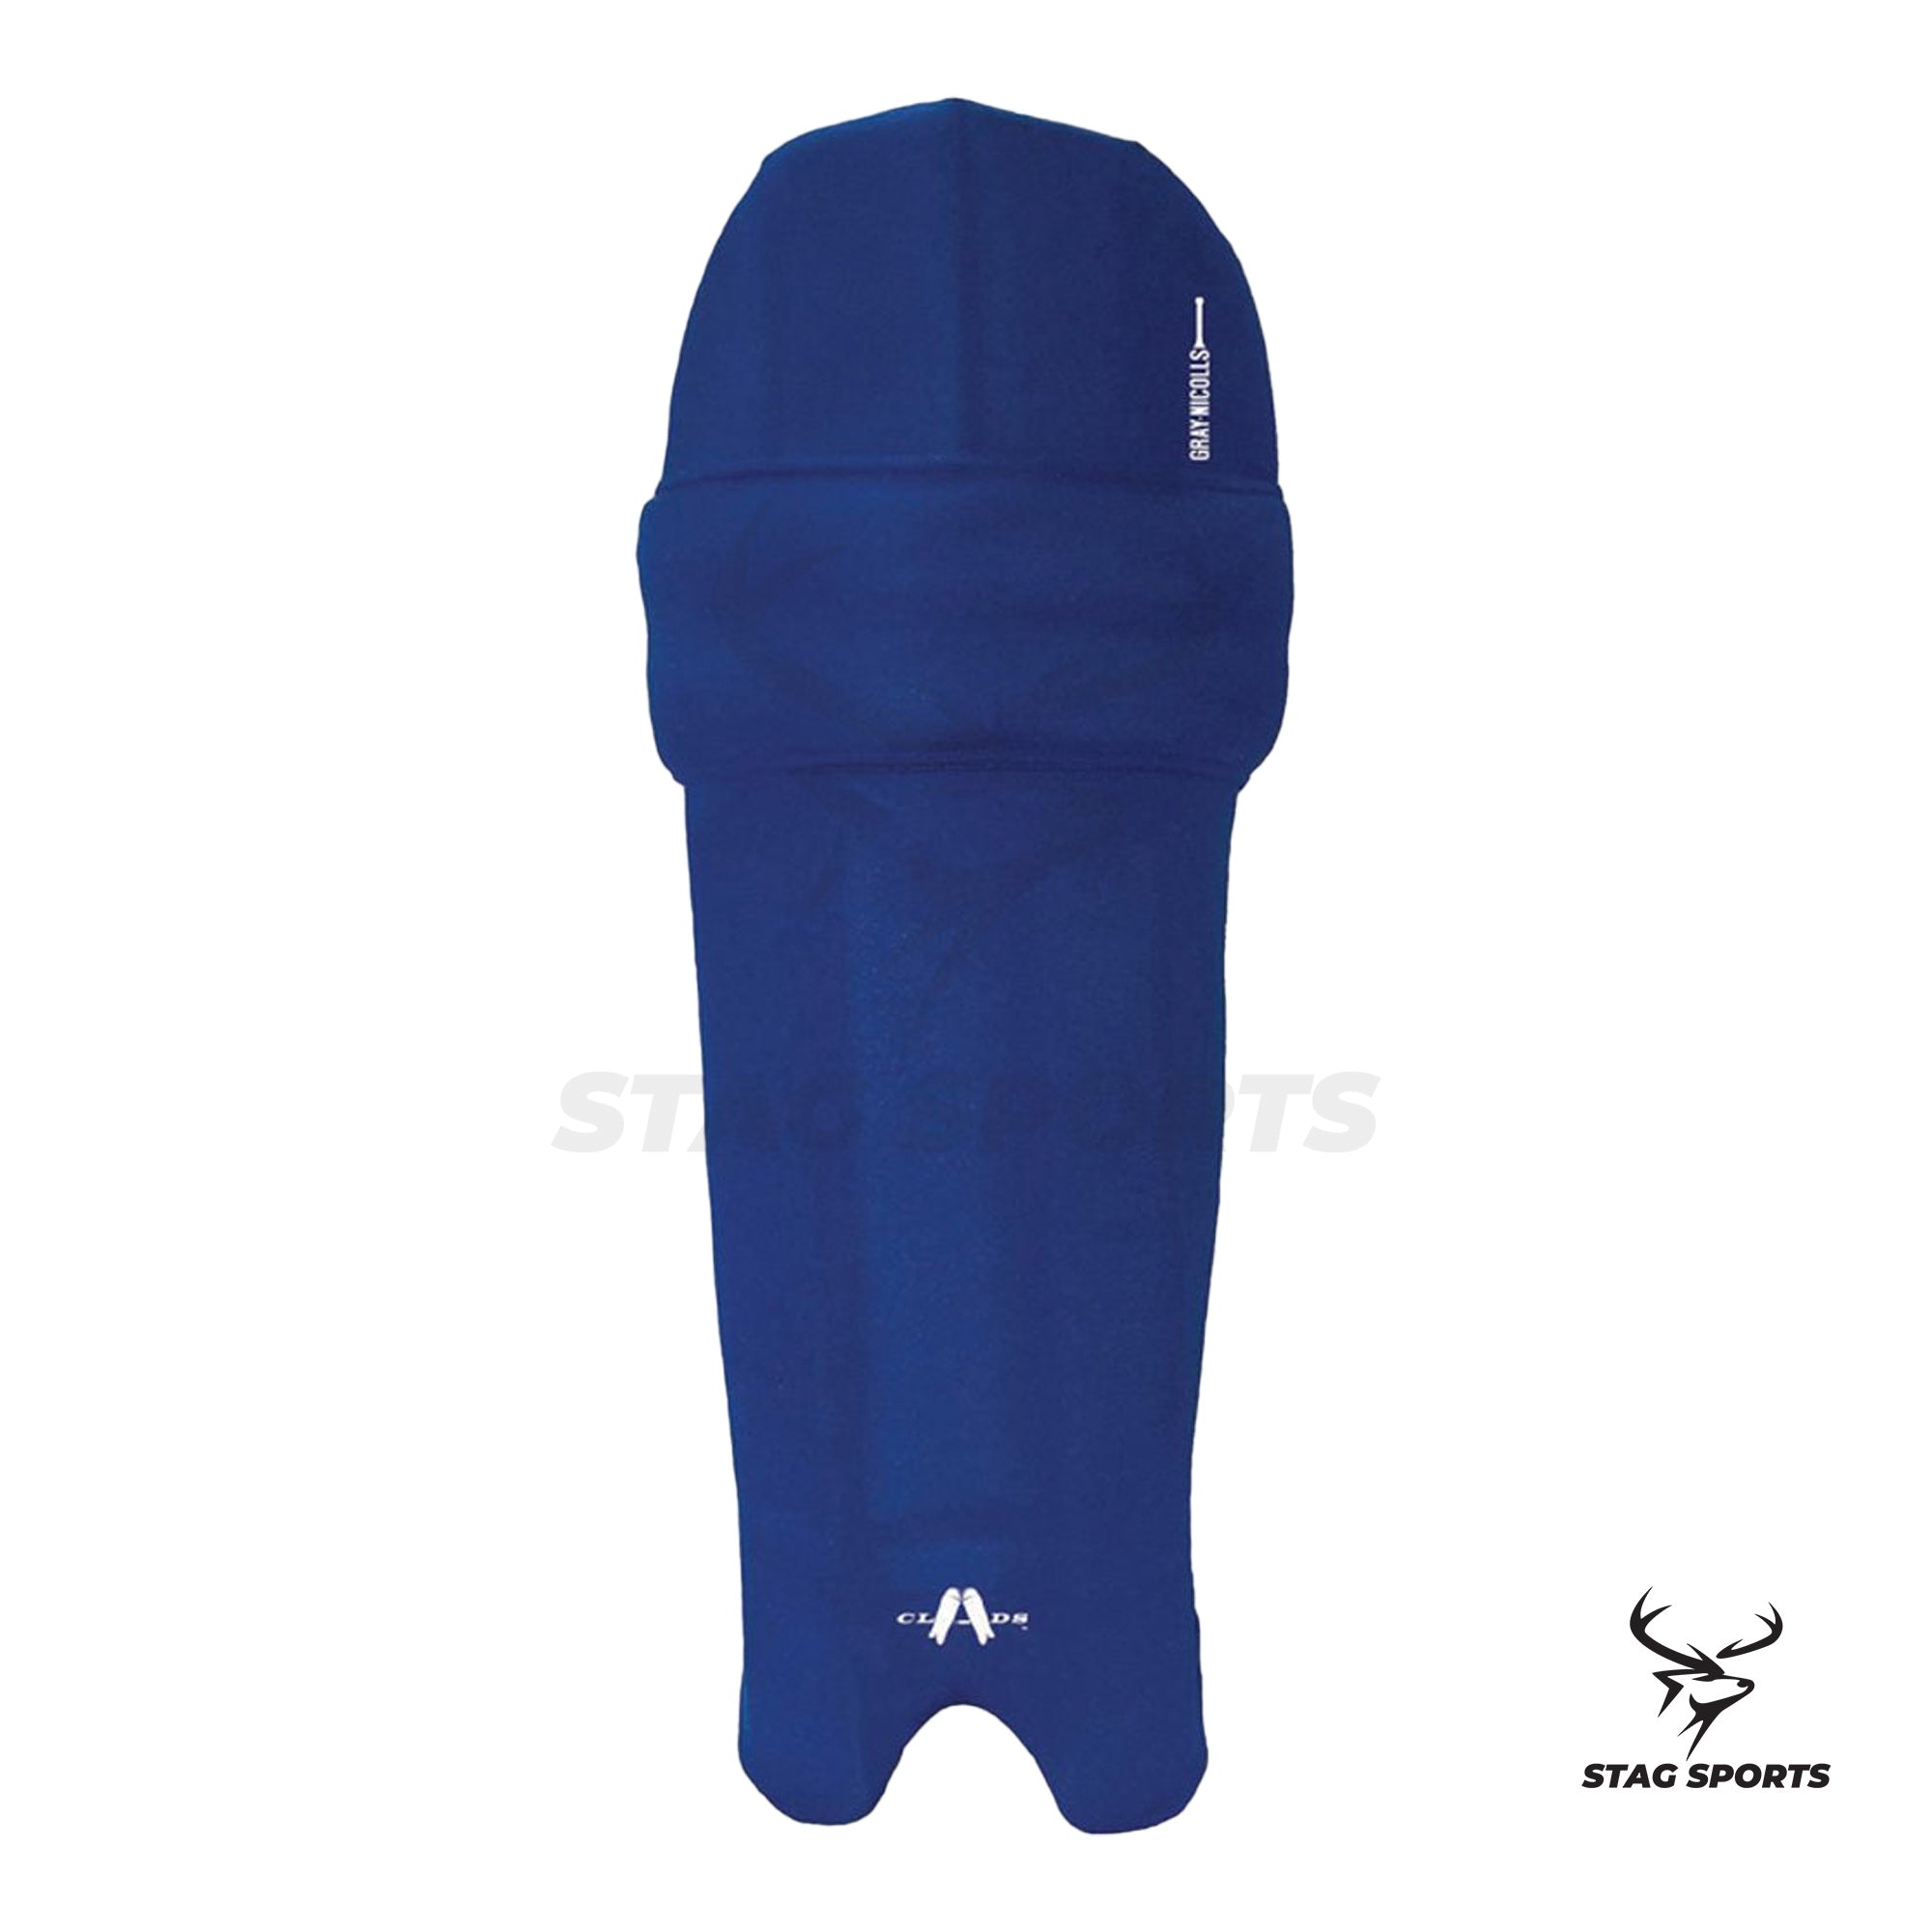 BUY CLADS COLOURED BATTING PAD COVERS - YOUTH